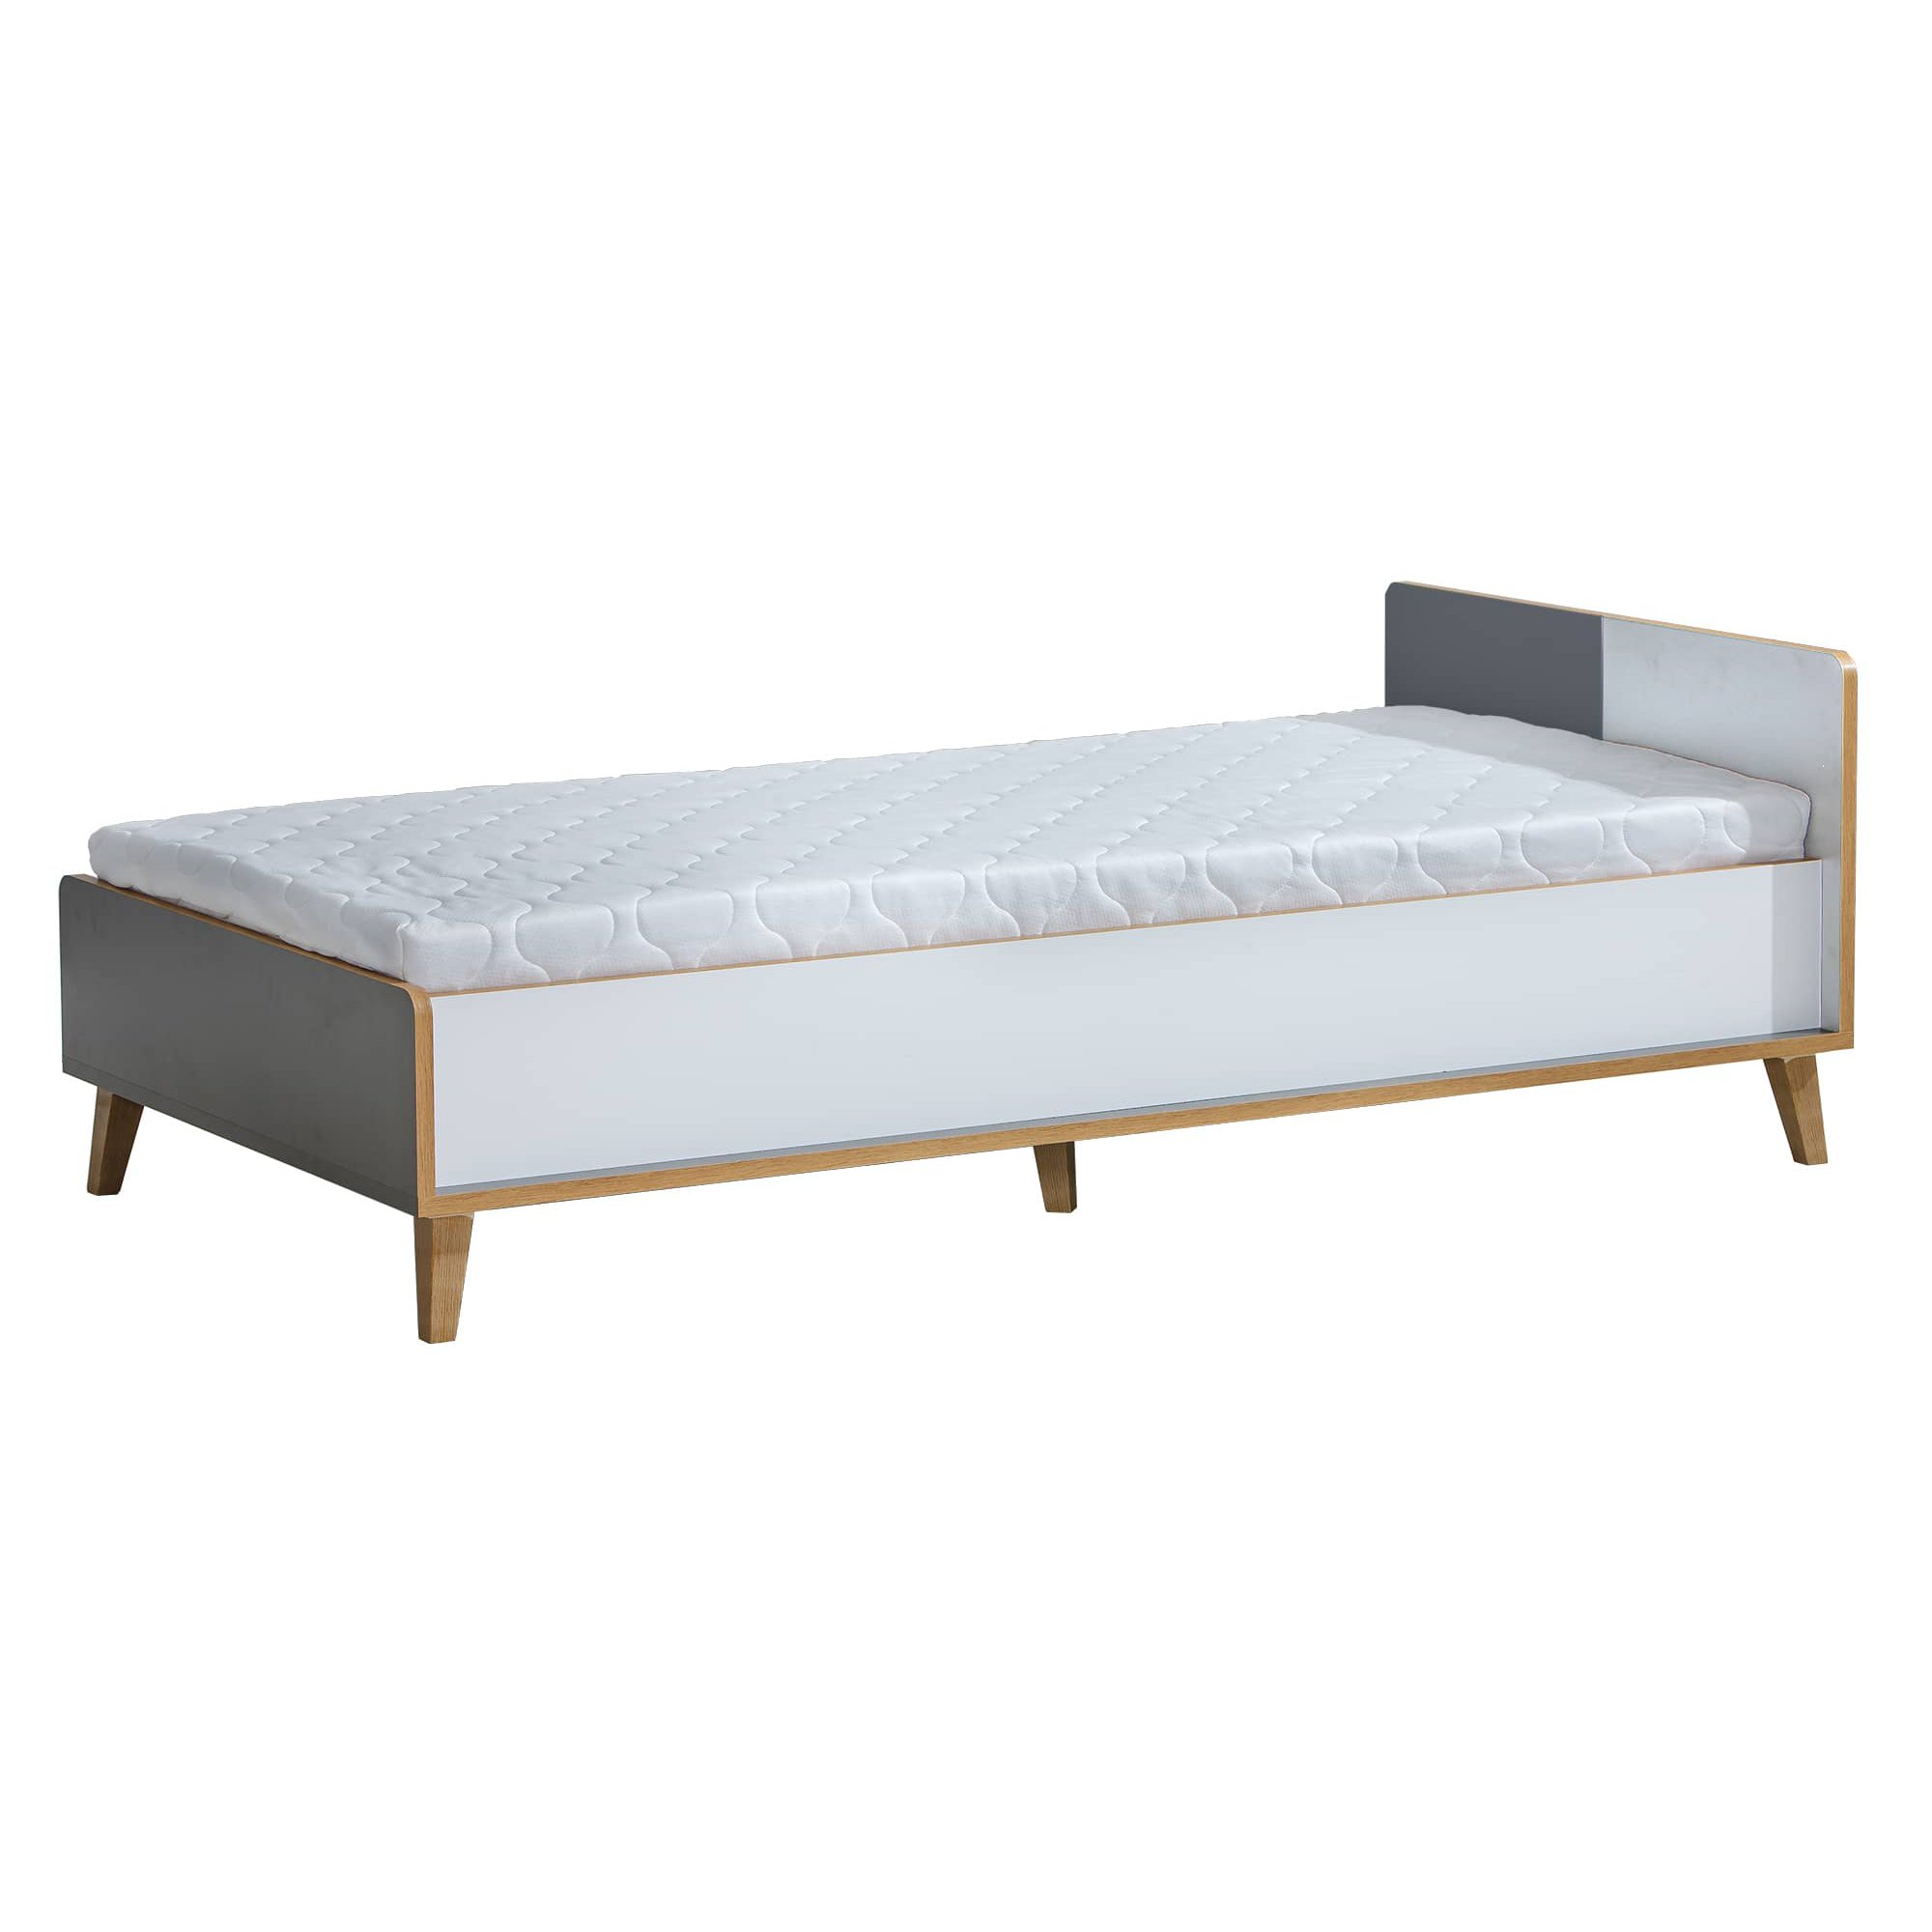 Werso W10 Single Bed - Anthracite 90 x 195cm